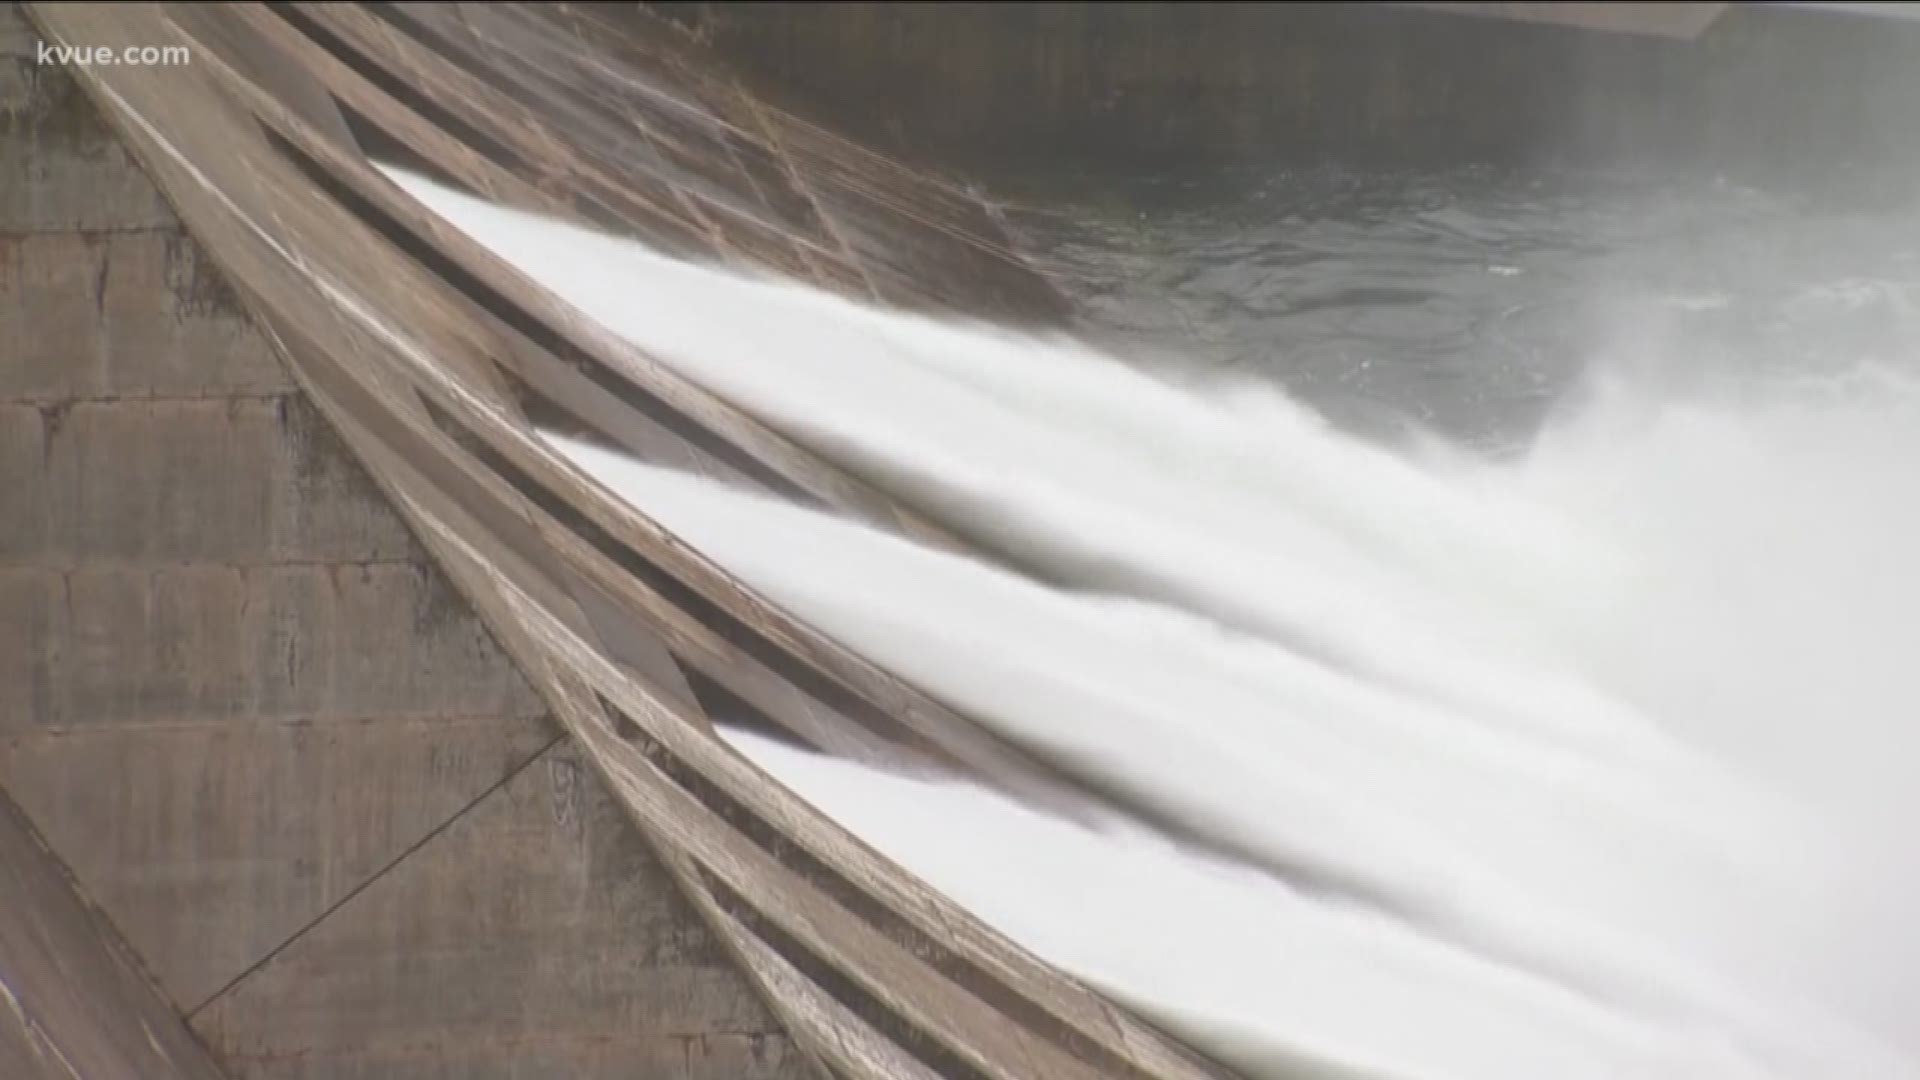 Four floodgates are currently open at Mansfield Dam on Lake Travis and officials said Wednesday afternoon they expect that four more are likely to open within the next 24 hours. The Lower Colorado River Authority said they encourage everyone to take immed